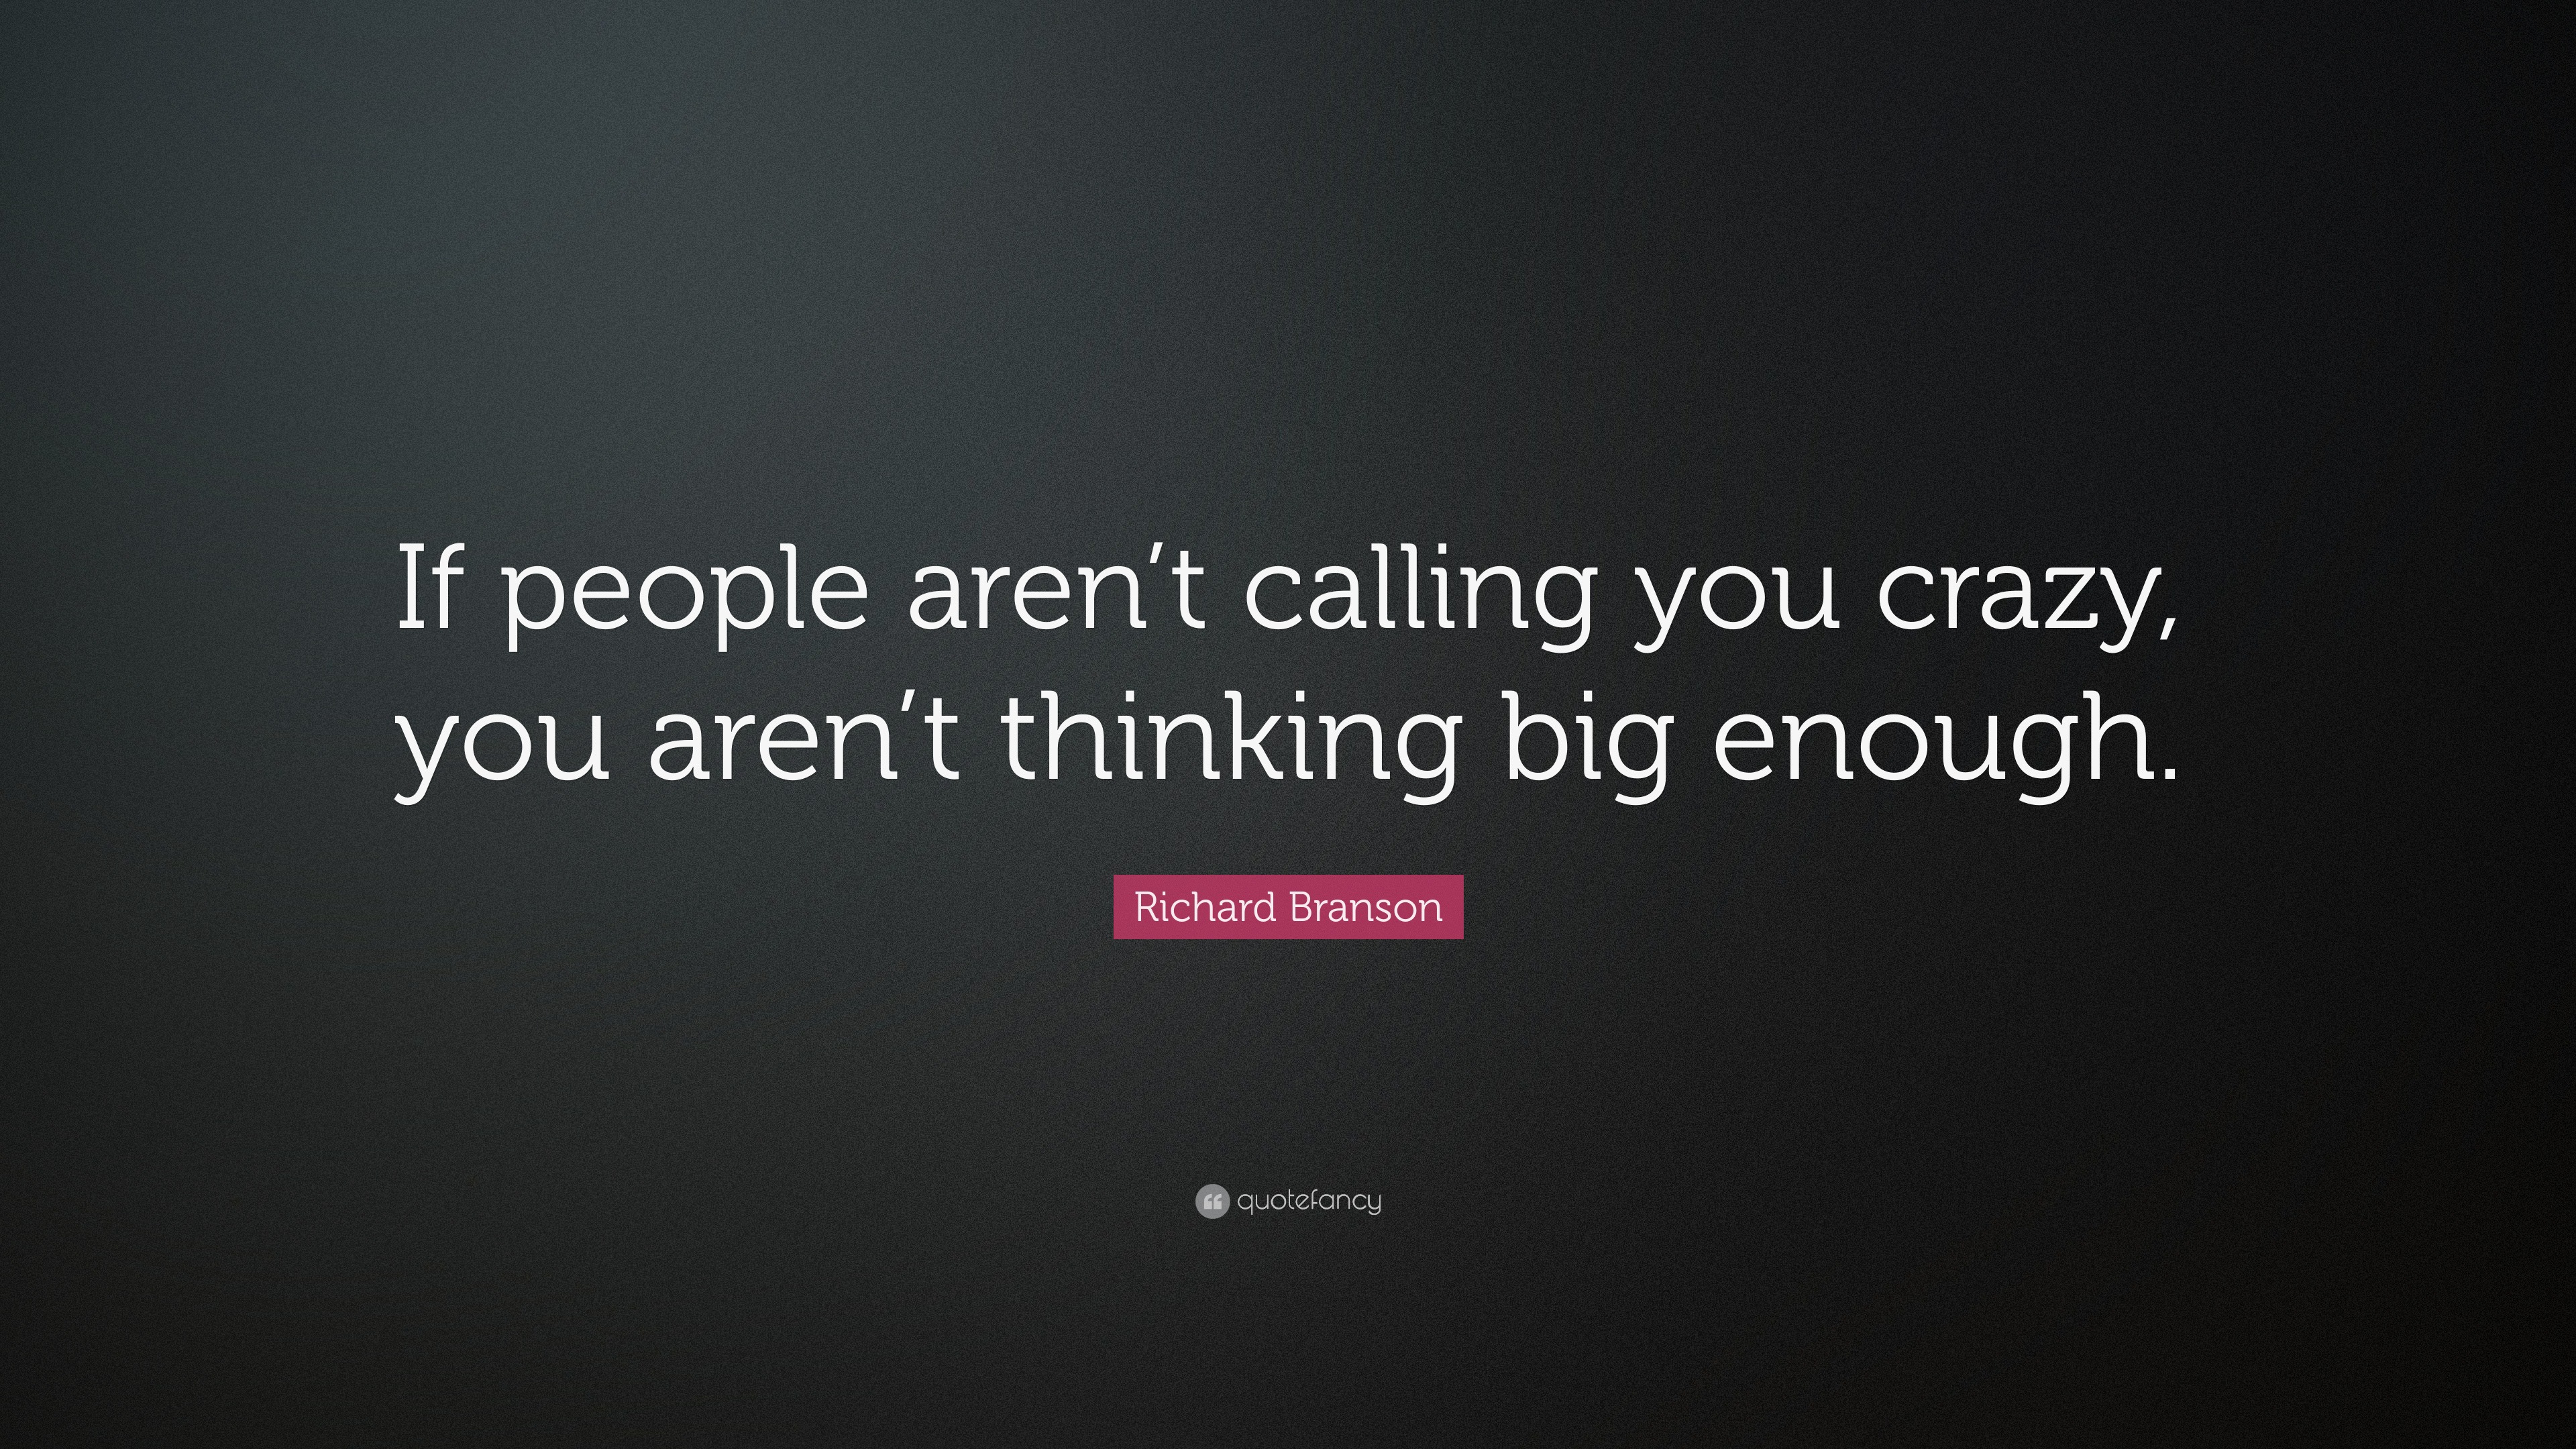 Richard Branson Quote: “If people aren’t calling you crazy, you aren’t ...